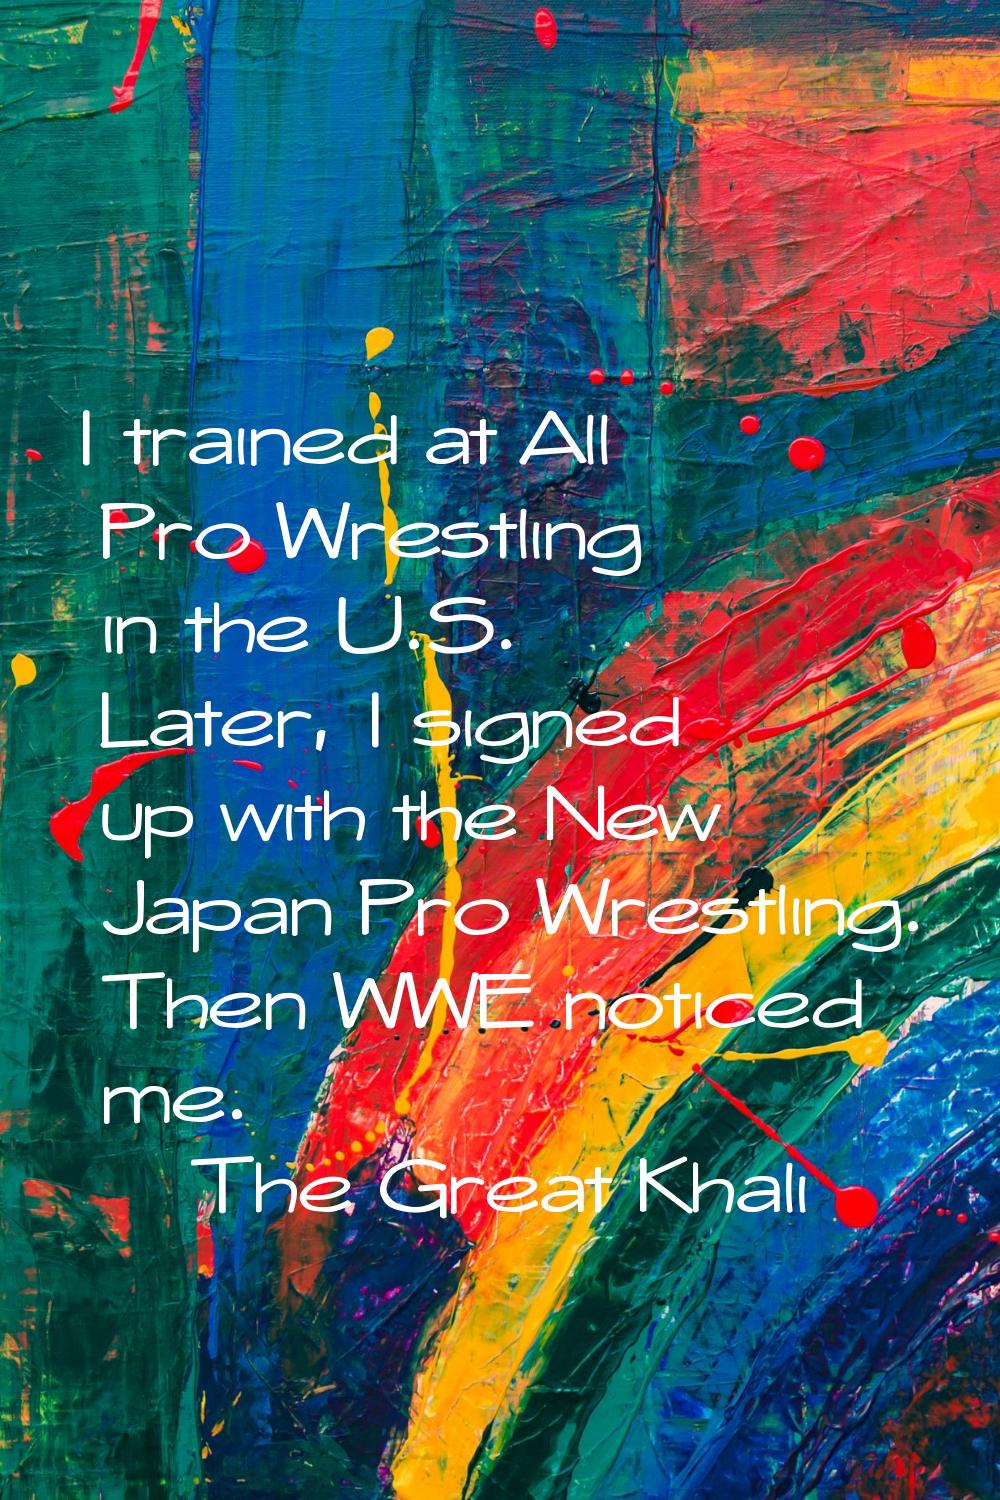 I trained at All Pro Wrestling in the U.S. Later, I signed up with the New Japan Pro Wrestling. The